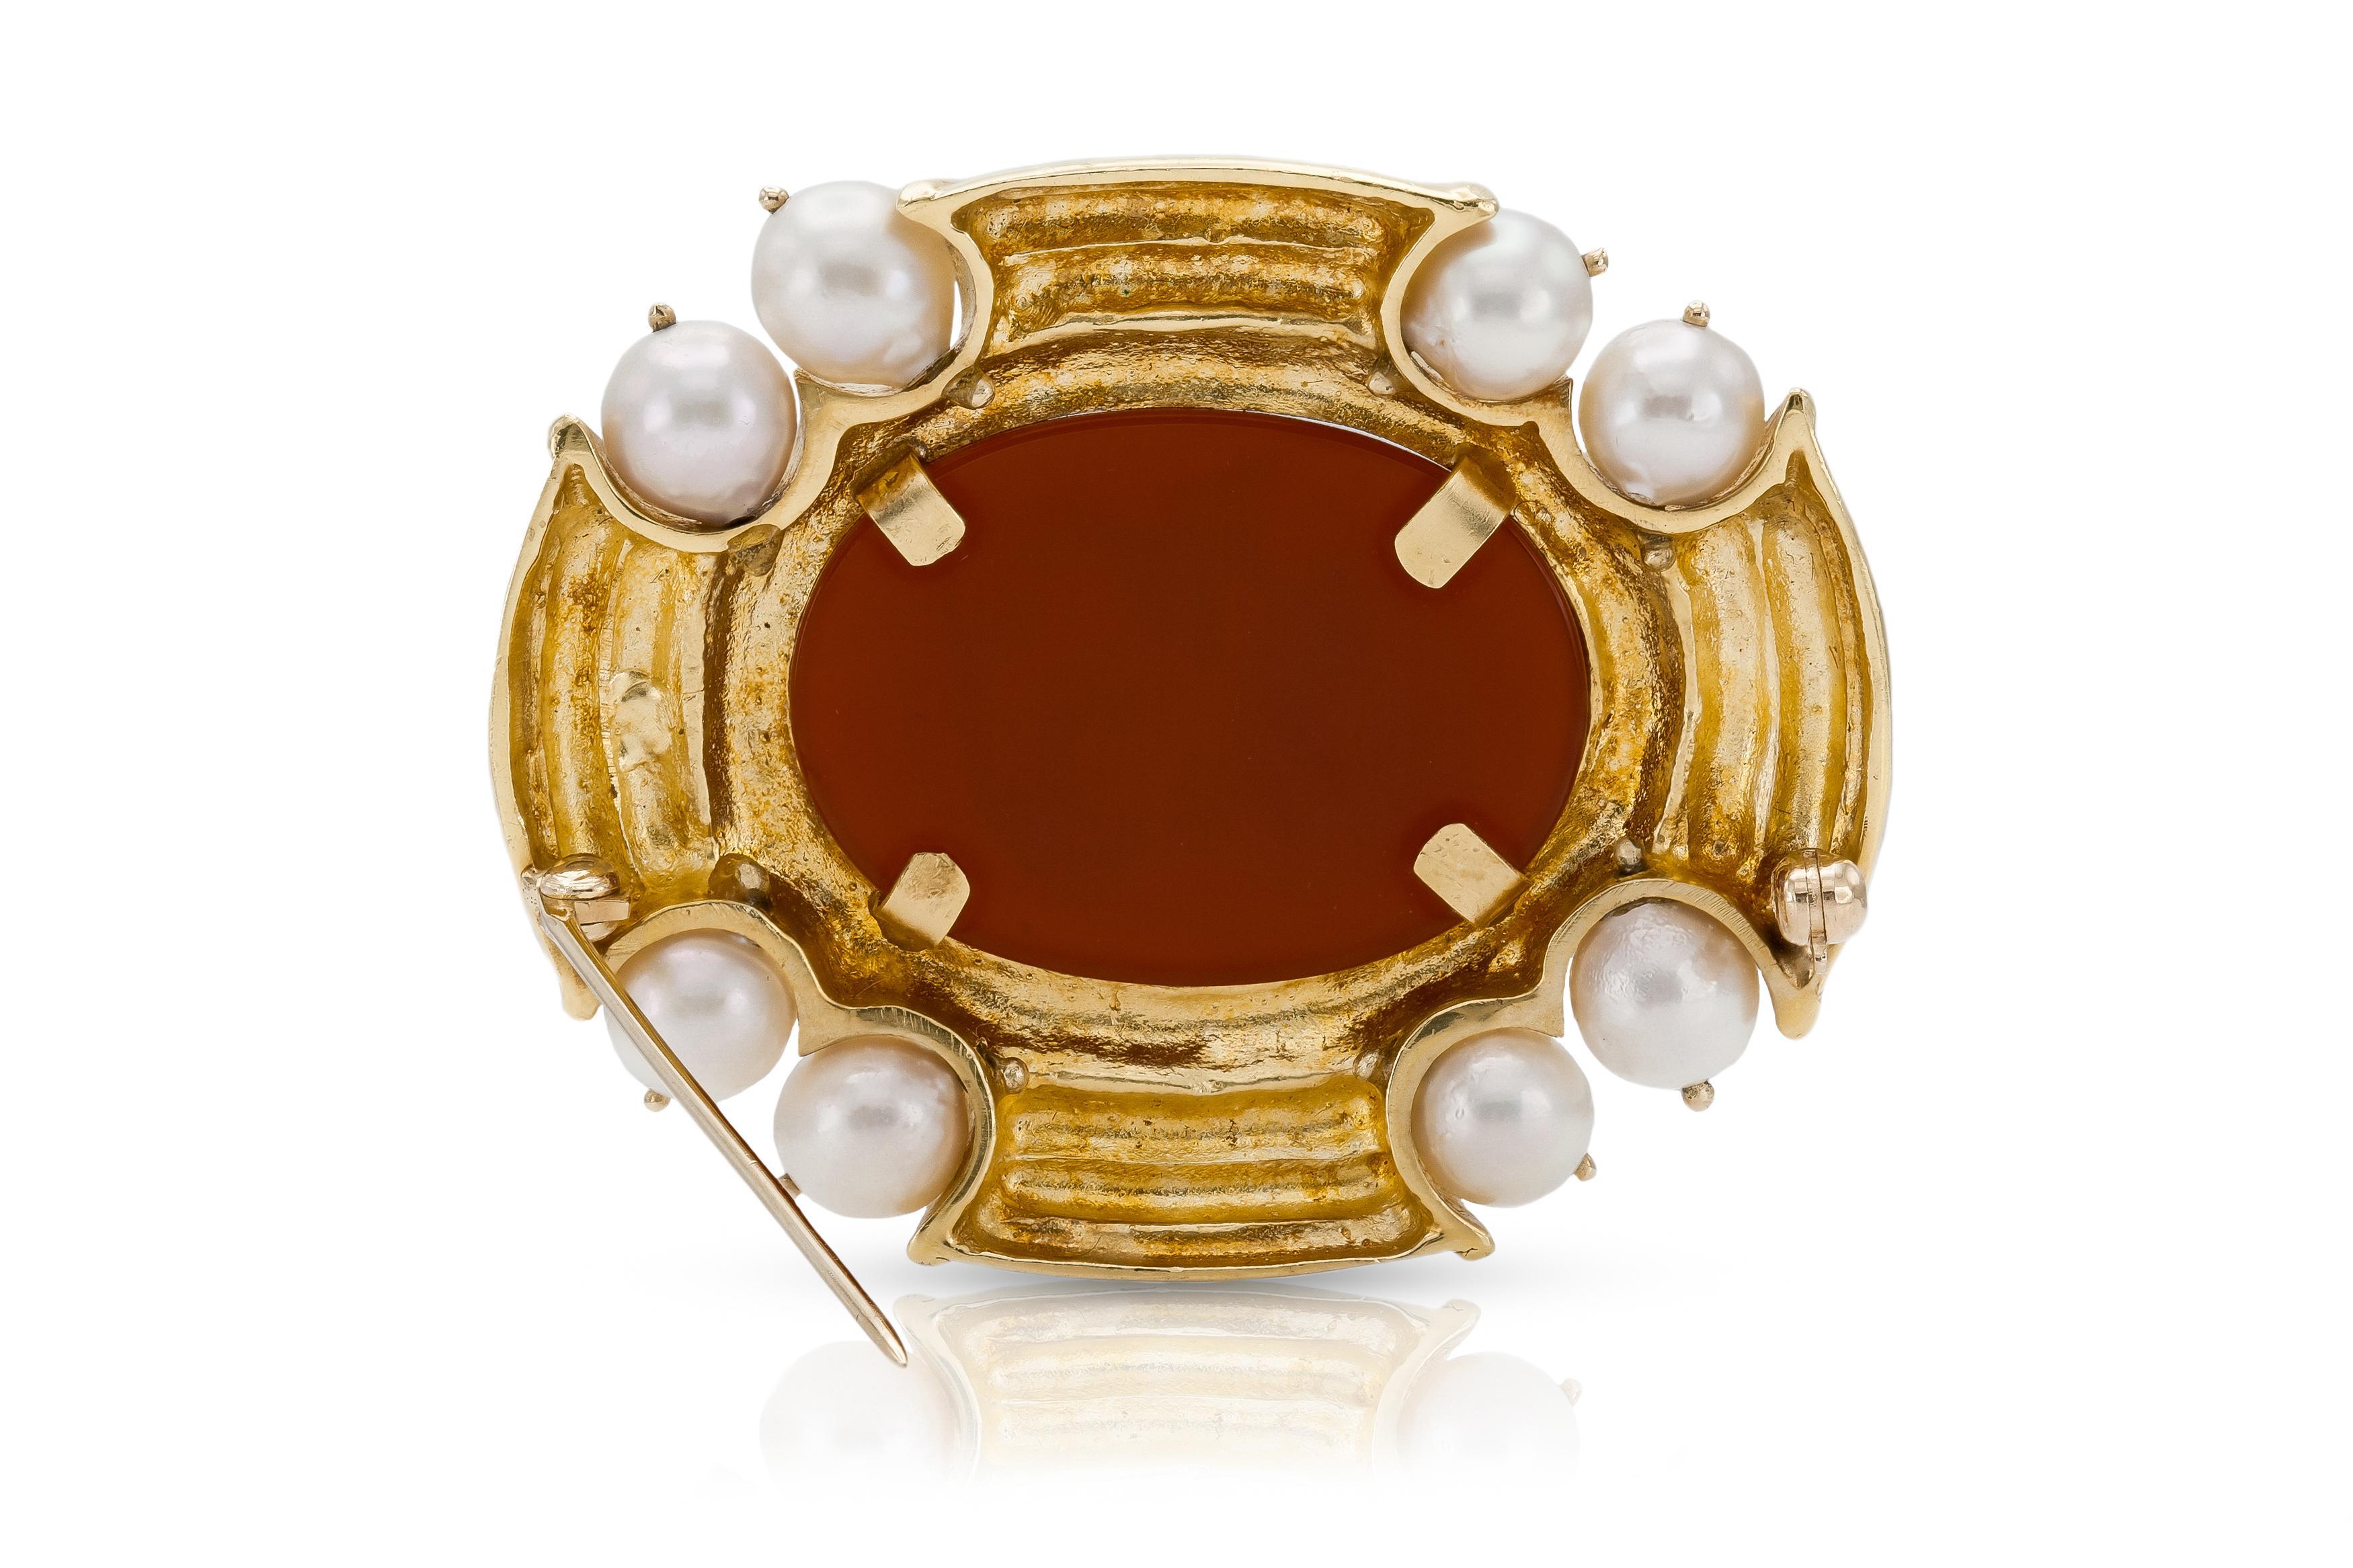 Carnelian Intaglio Yellow Gold Brooch with Pearls In Good Condition For Sale In New York, NY